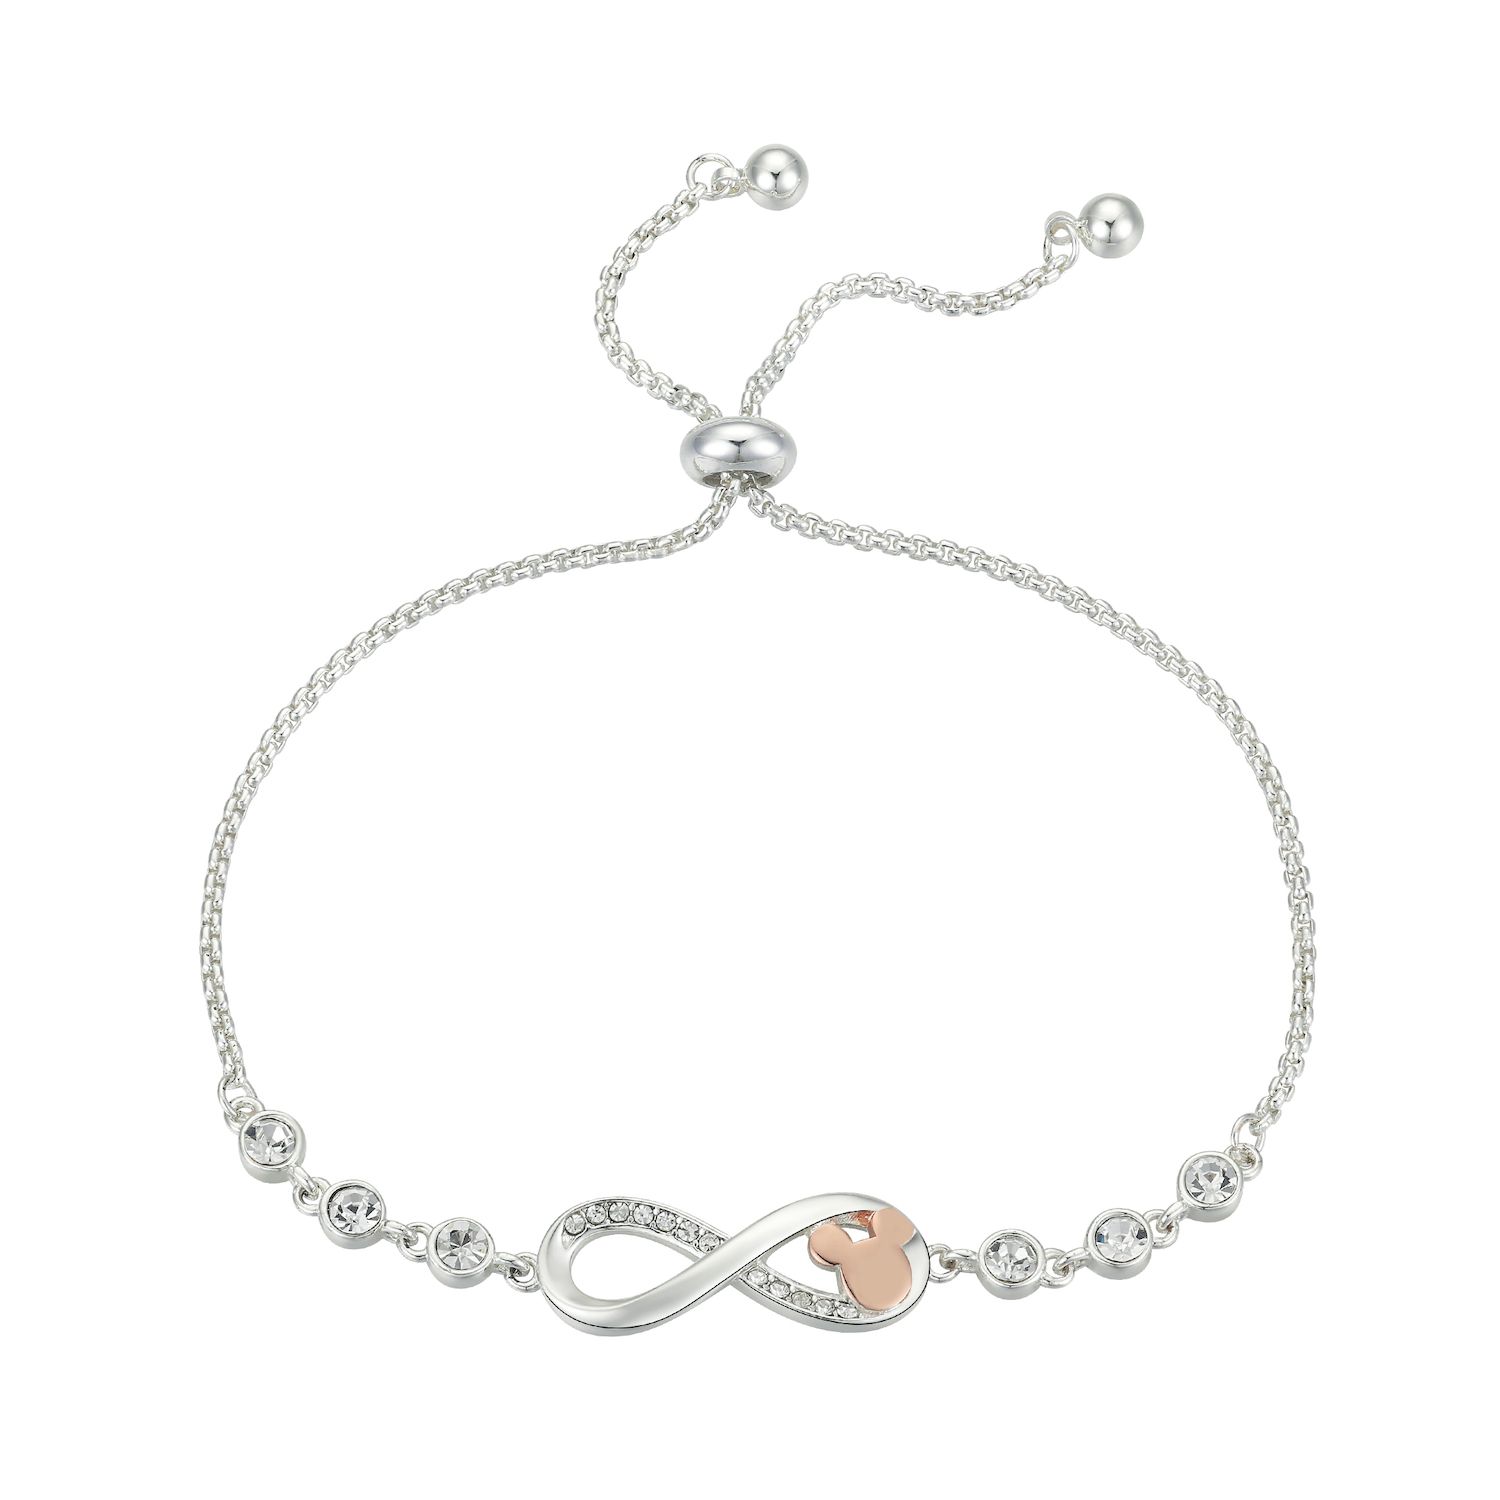 Image for Disney 's Mickey Mouse Two-Tone Crystal Infinity Bolo Bracelet at Kohl's.